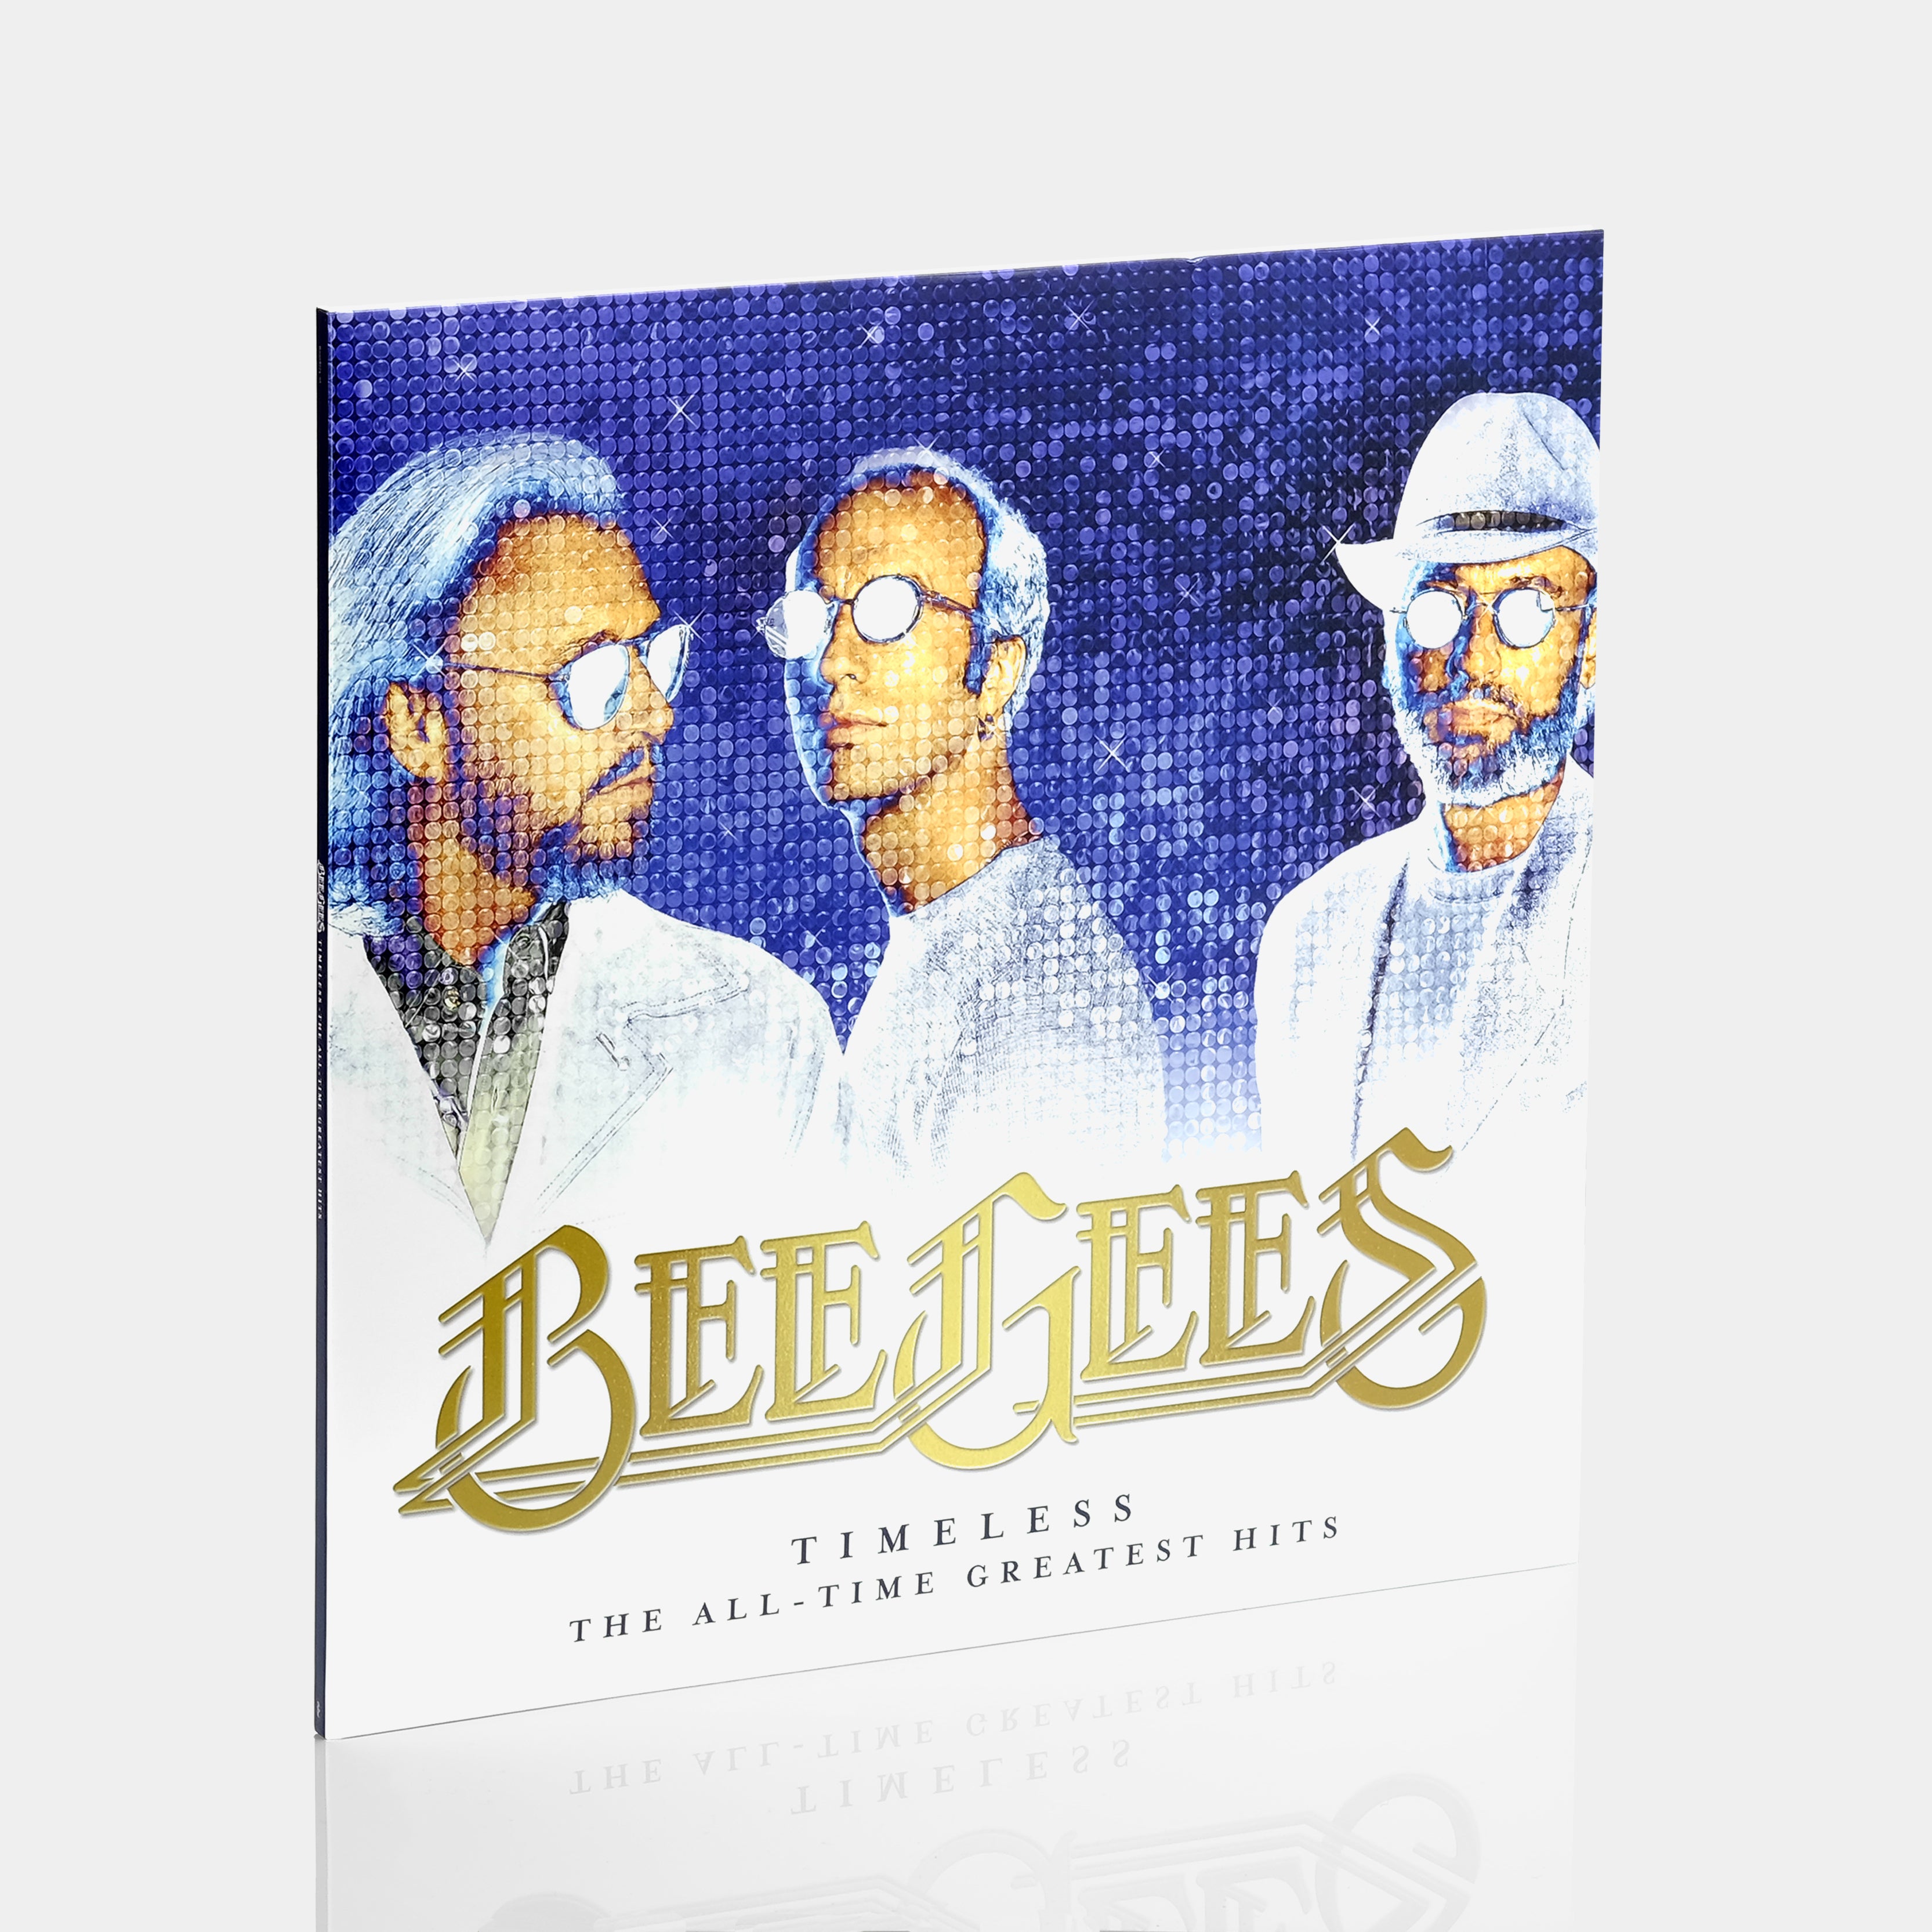 Bee Gees - Timeless: The All-Time Greatest Hits 2xLP Vinyl Record